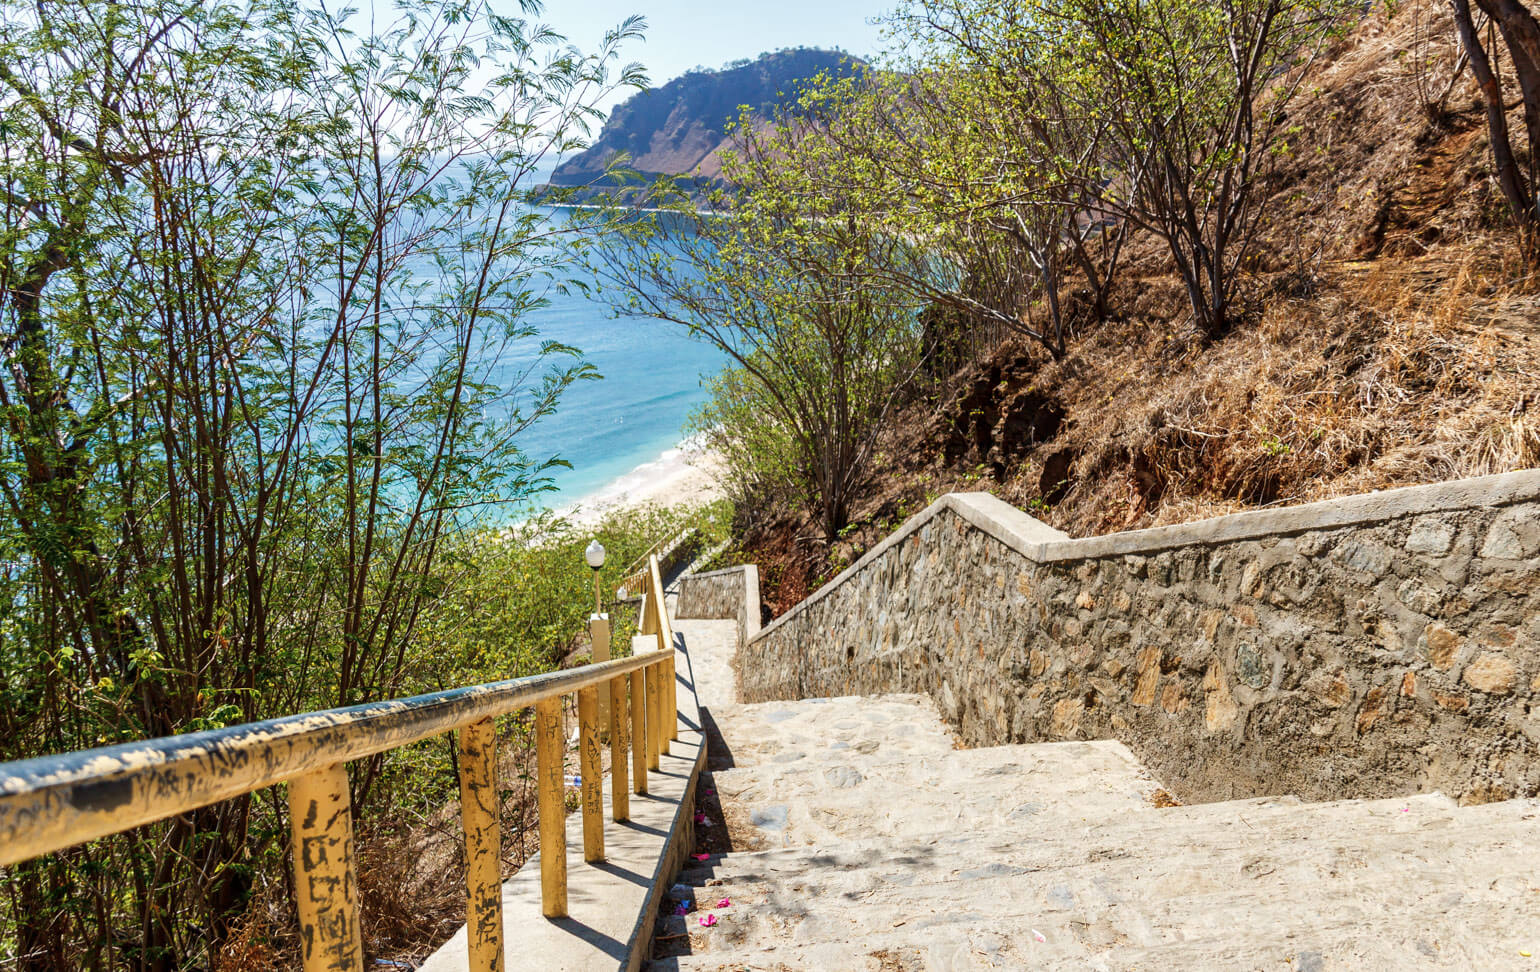 Stairs down to the Jesus Backside Beach, Dili